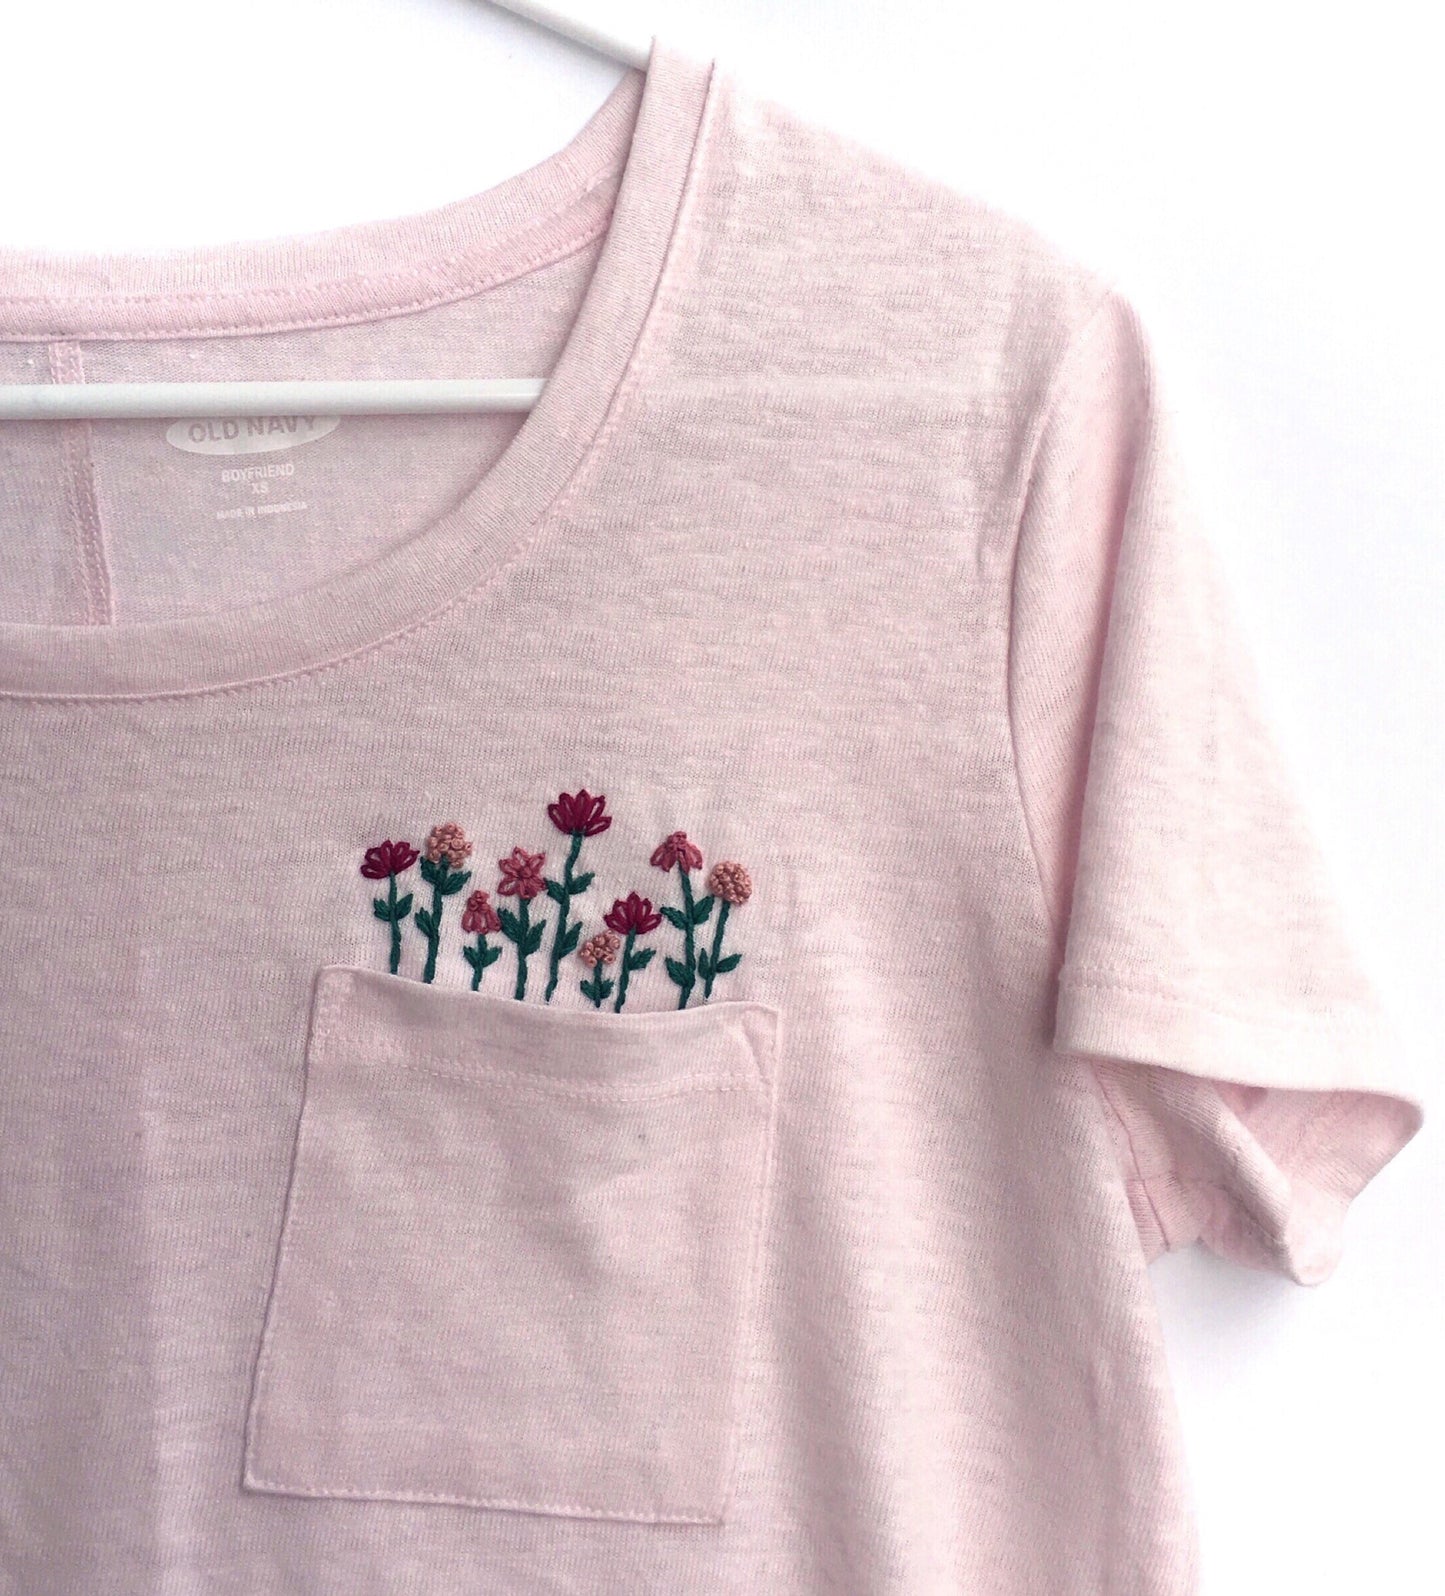 Pocket Full of Posies PDF Embroidery Pattern